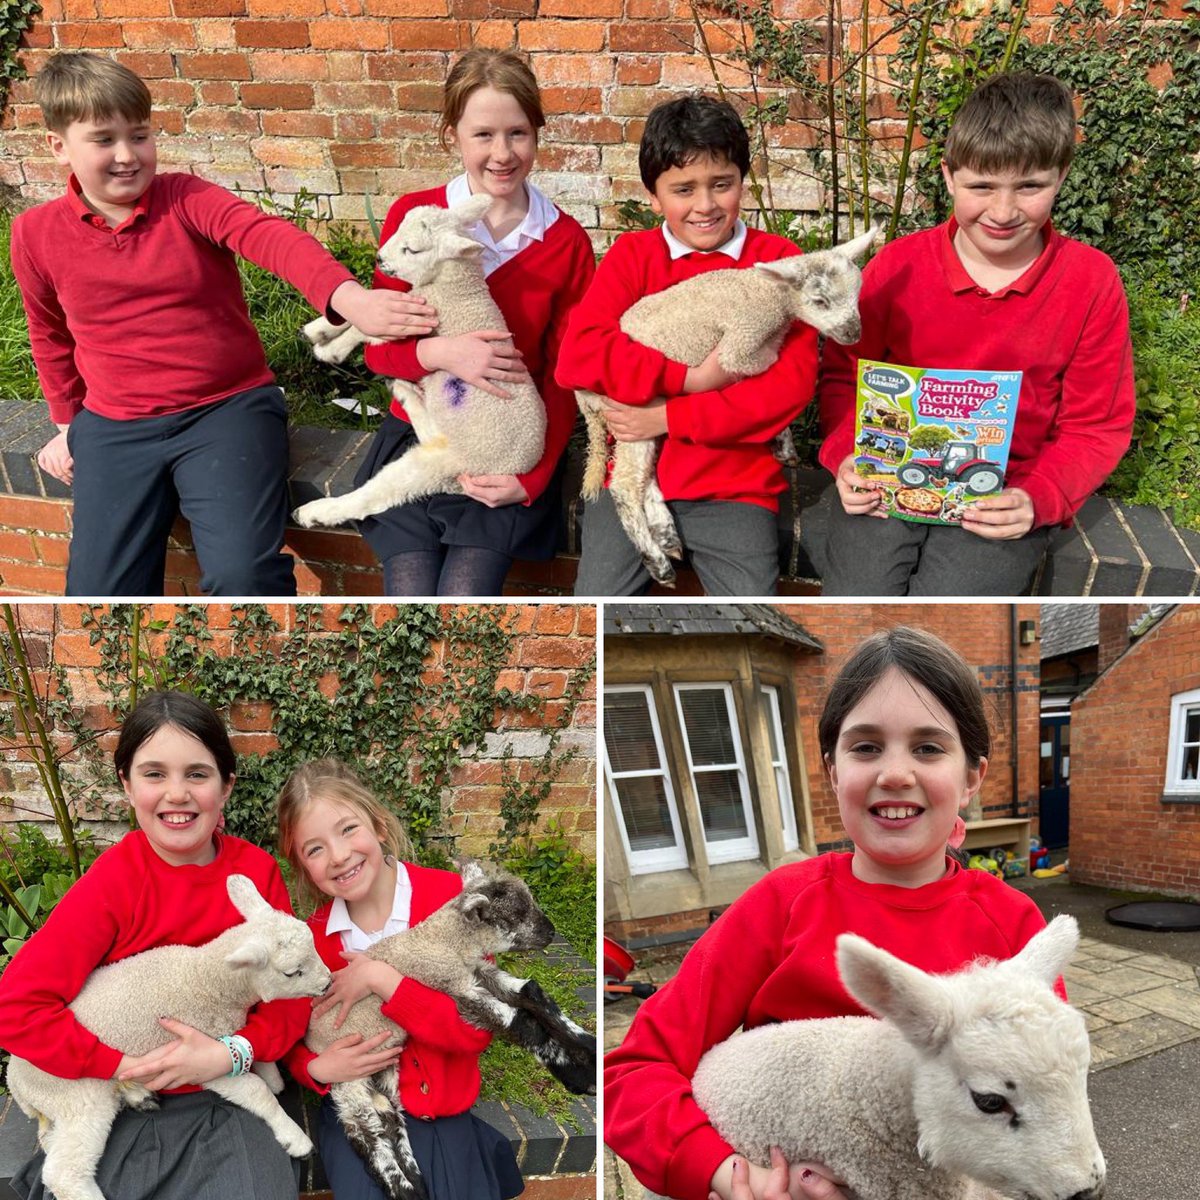 We had a great day with pupils at our local primary school today, learning all about lambing! Fay took ewes and their lambs, plus we took @NFUEducation activity books for the children to@learn about food and farming! Thanks for having us @HallatonPrimary